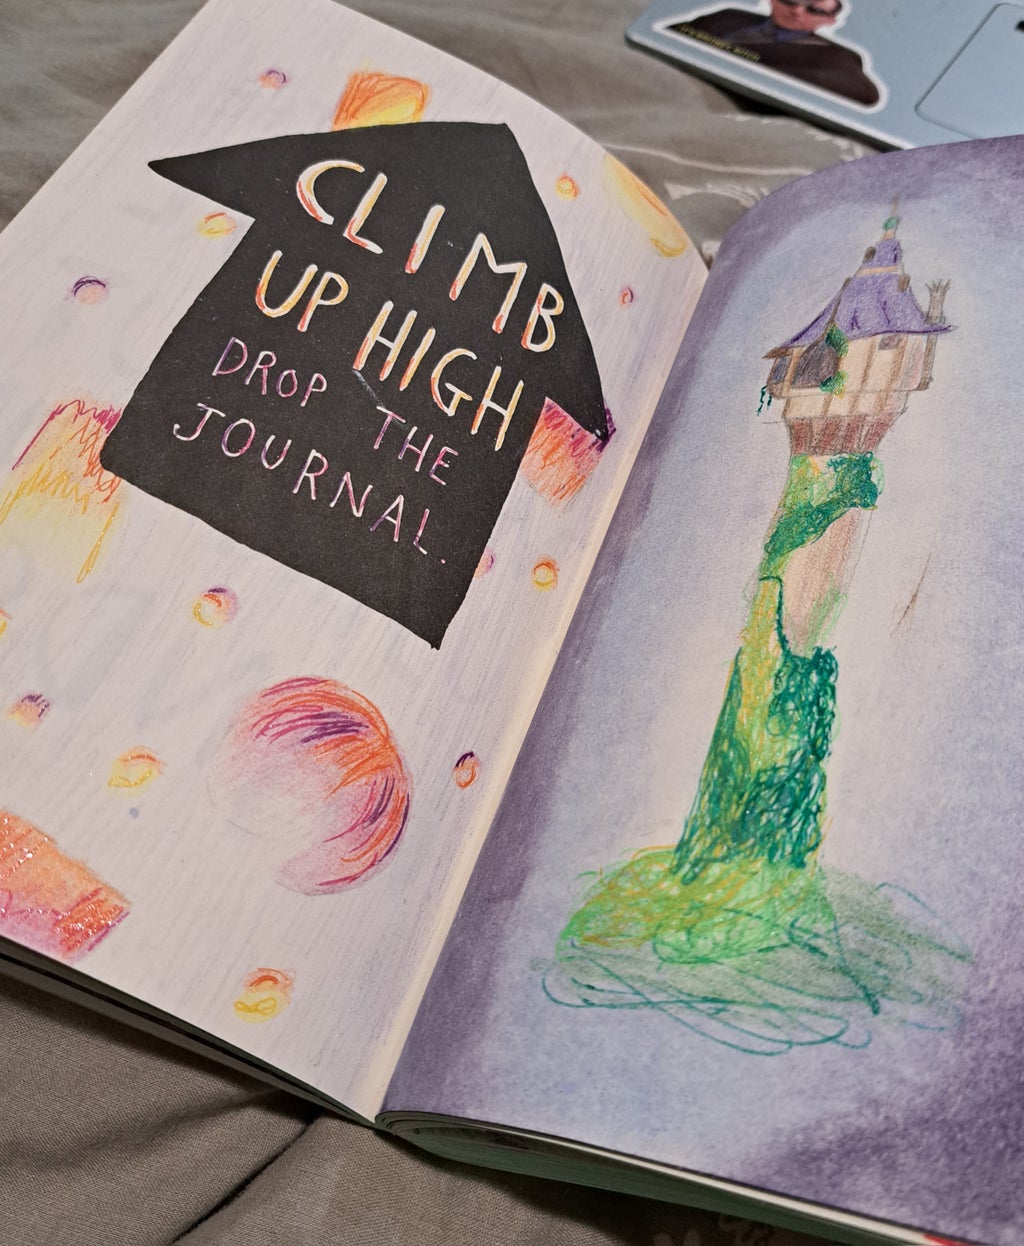 Wreck This Journal creative art page